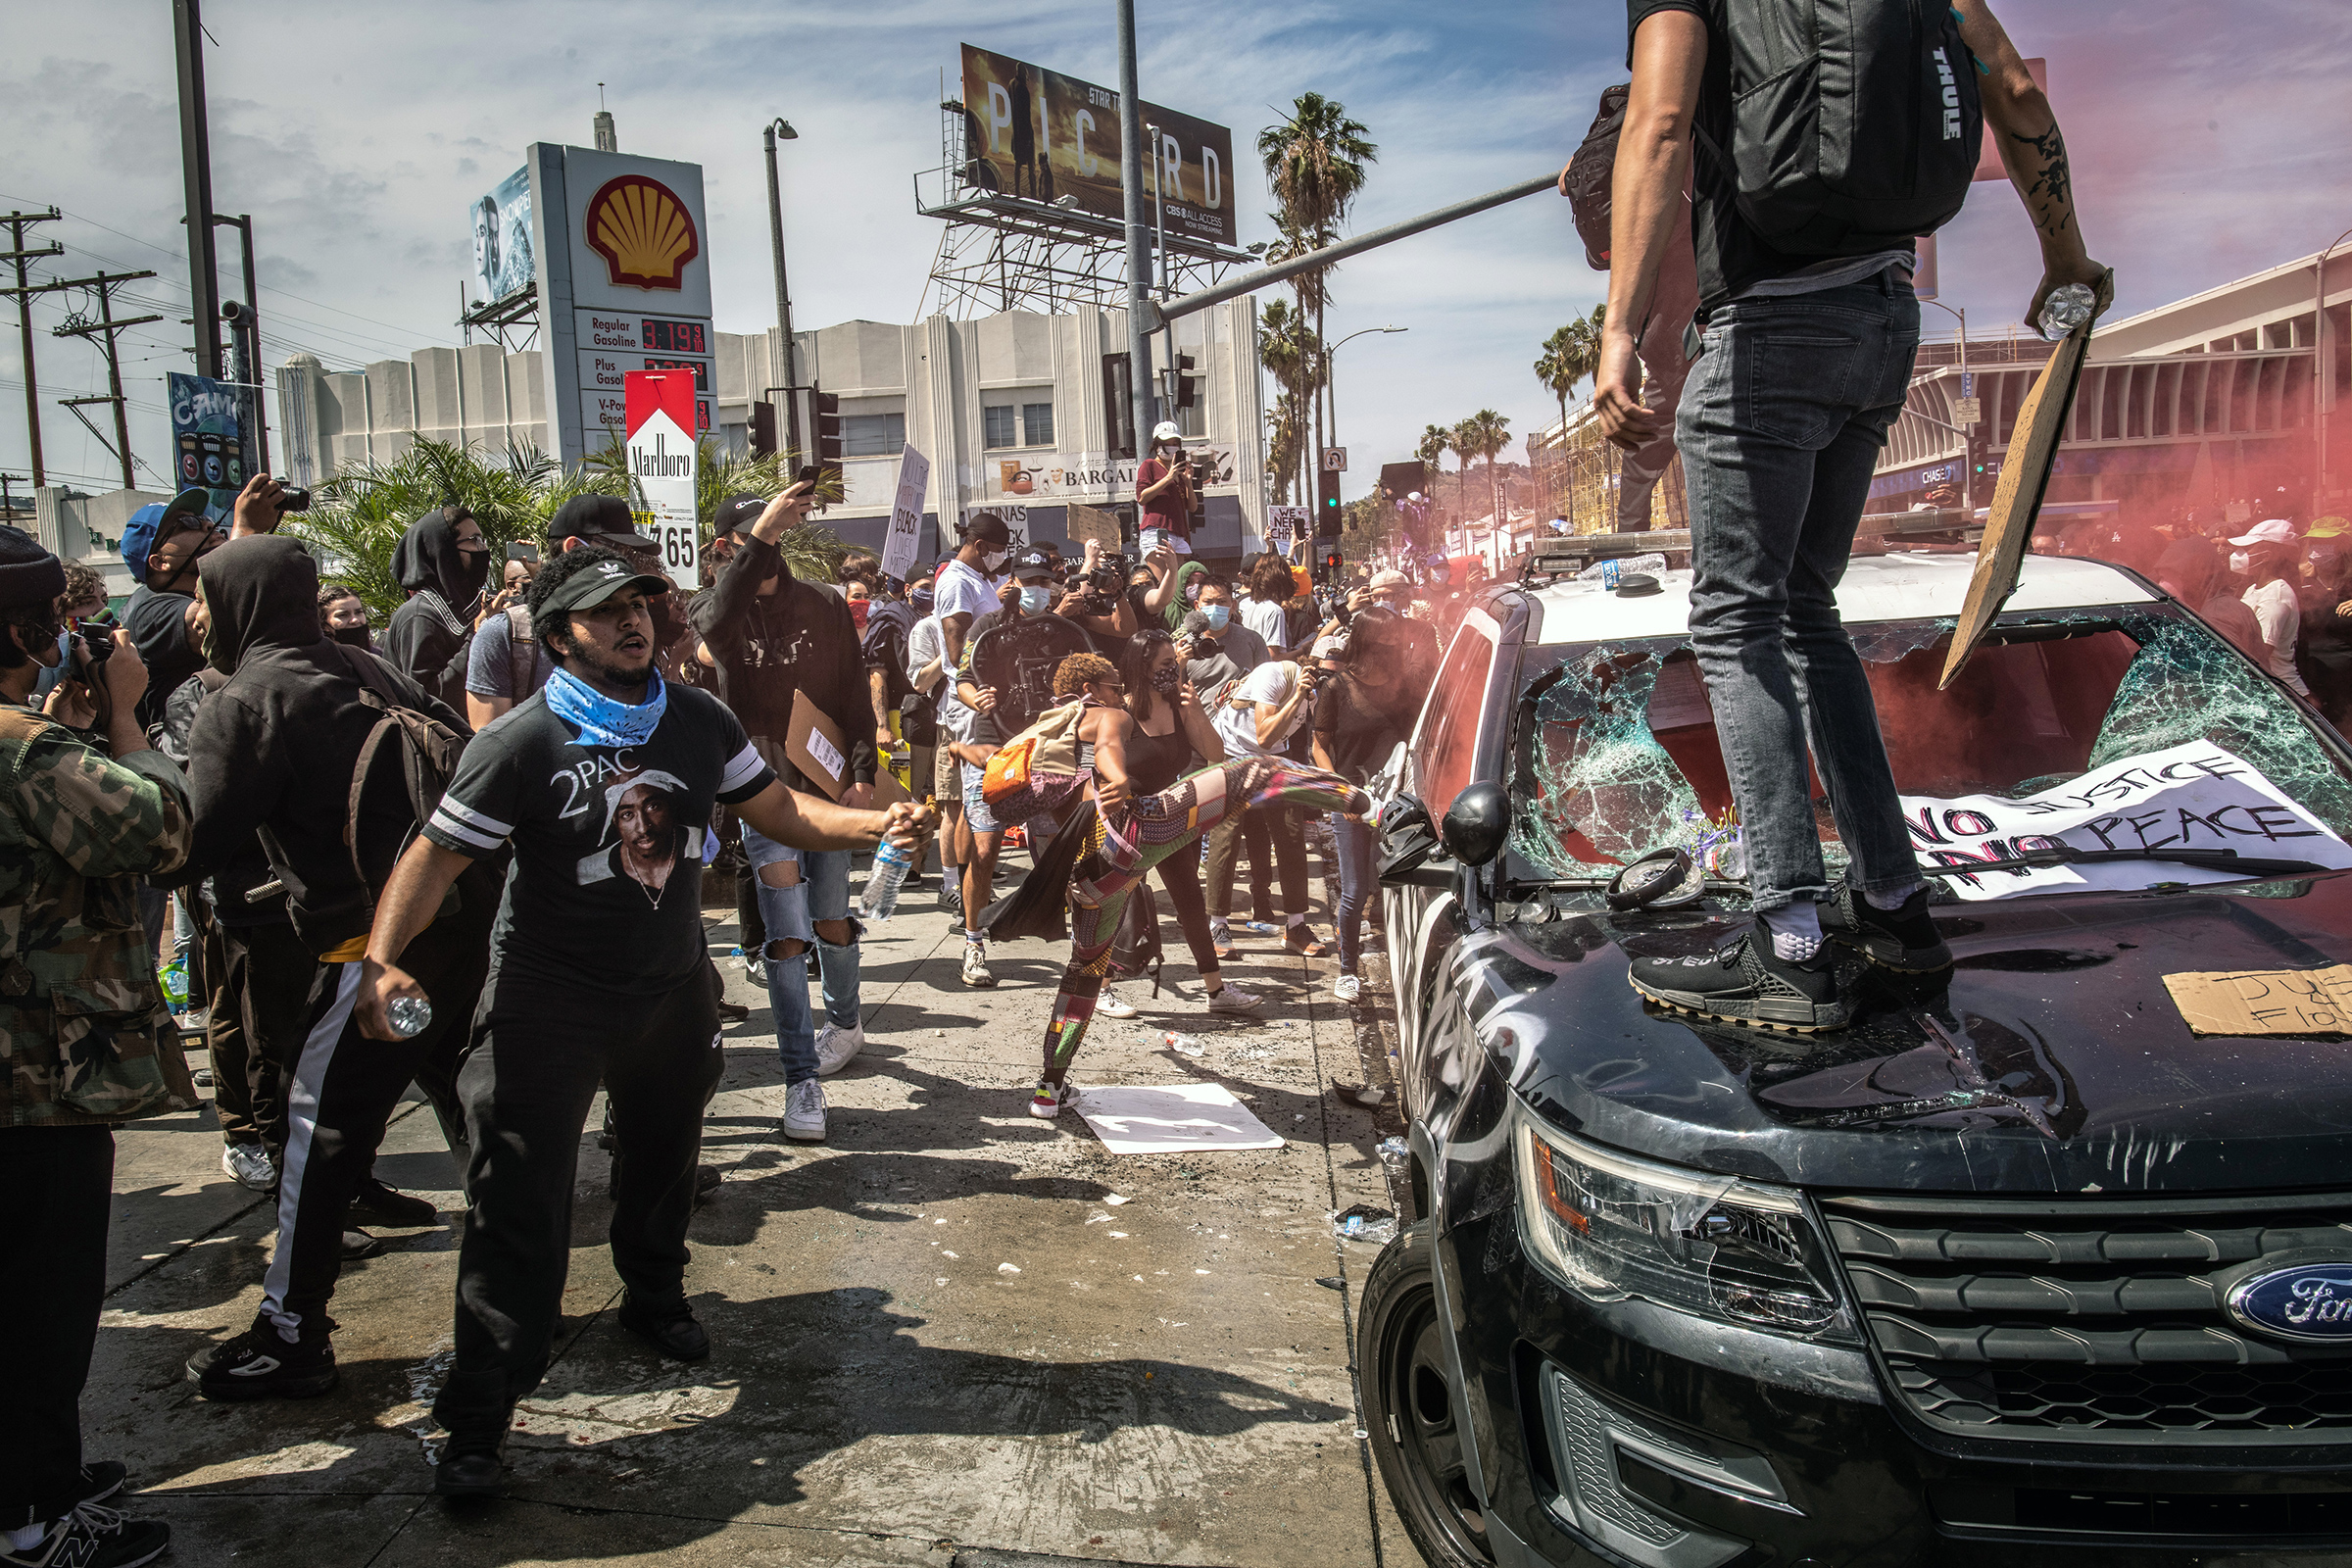 A police vehicle is vandalized by protesters in Los Angeles on May 30. Demonstrators returned to the nation's streets in sweeping fashion on Saturday in a show of national anger and sorrow over the death of George Floyd.